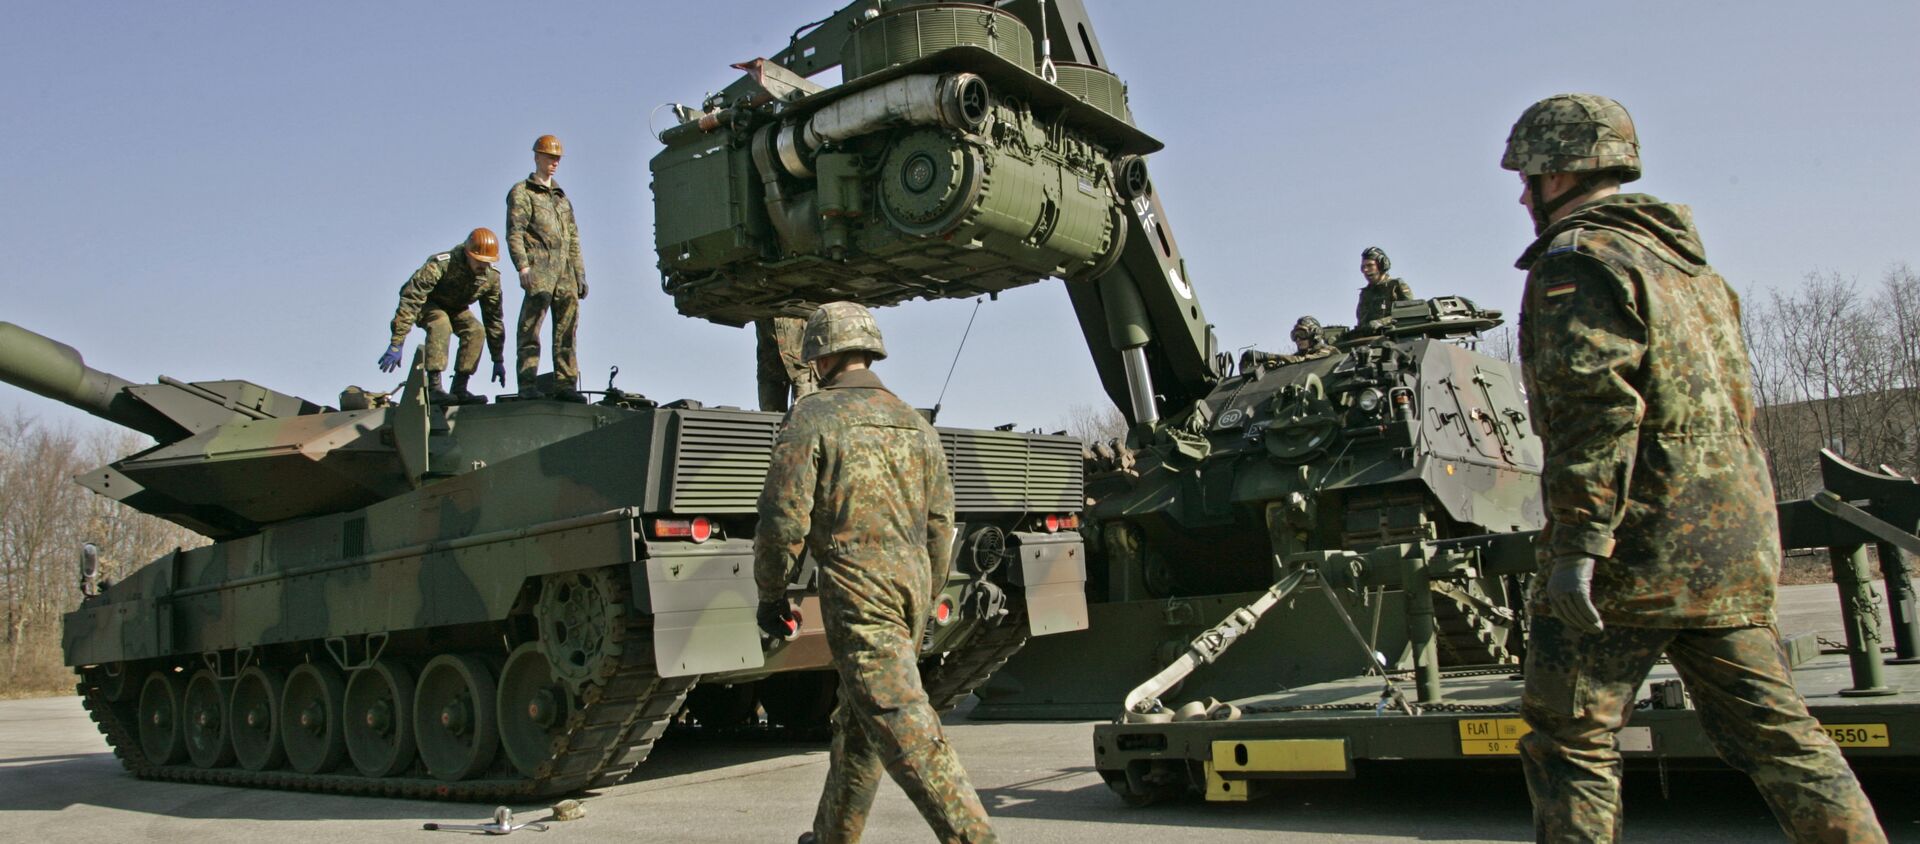 The crew of a 'Buffalo' wrecker tank, right, of the German Army lifts the engine of a Leopard 2 battle tank, left, for repair during a demonstration at the Bayern Barracks in Munich, southern Germany, on Wednesday, Feb. 20, 2008 - Sputnik Afrique, 1920, 27.01.2020